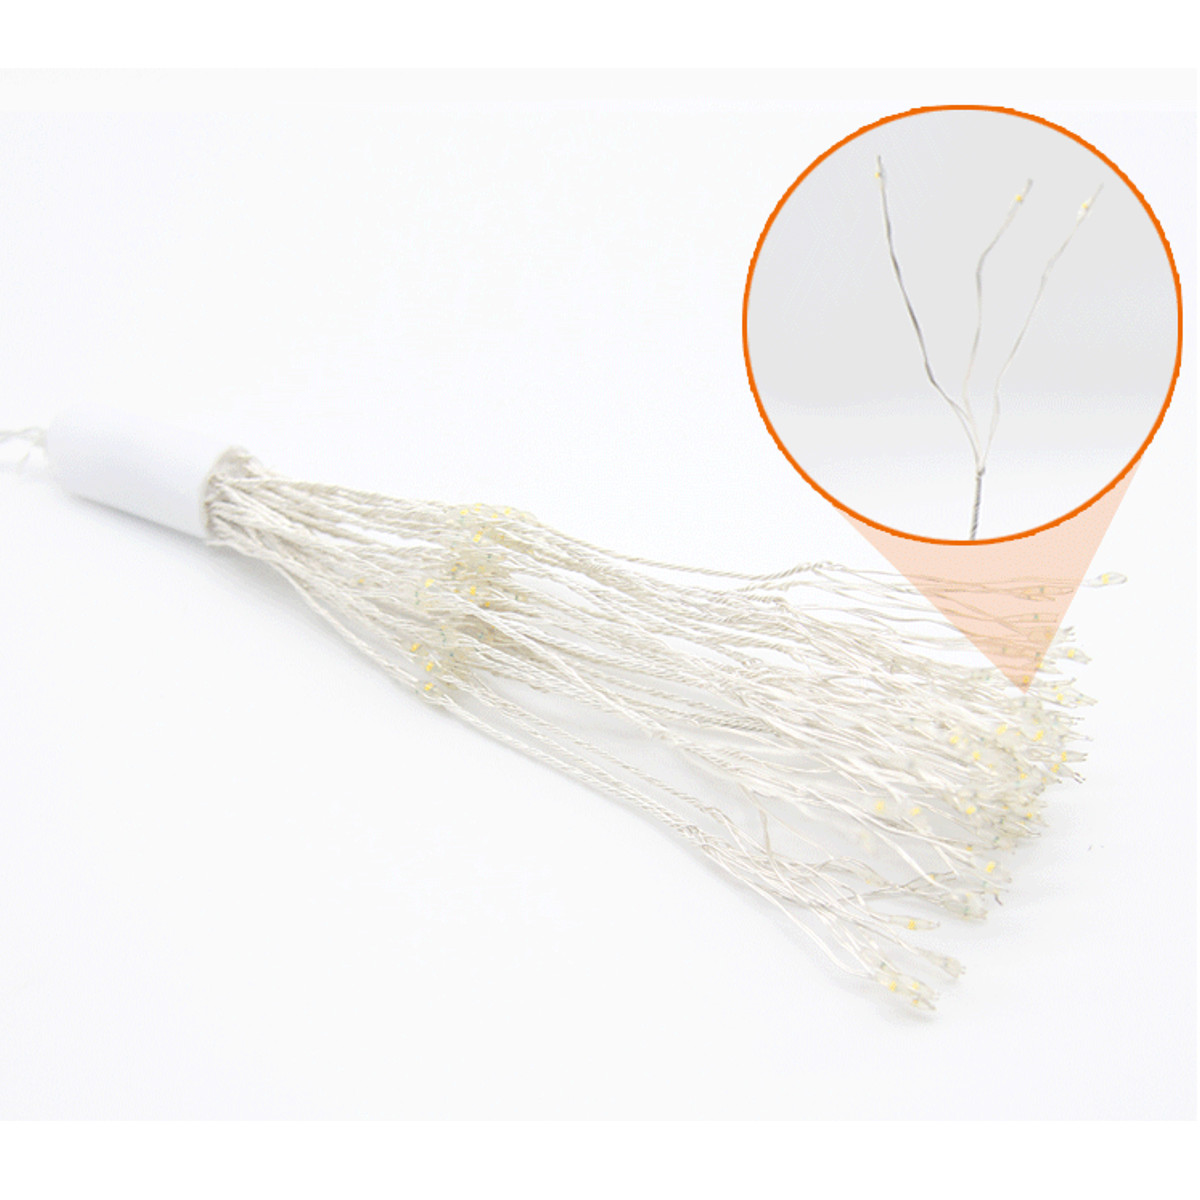 100200-LED-Firework-Light-8-Mode-Fairy-String-Lamp-with-Remote-Control-for-Home-Garden-Decor-1678624-6